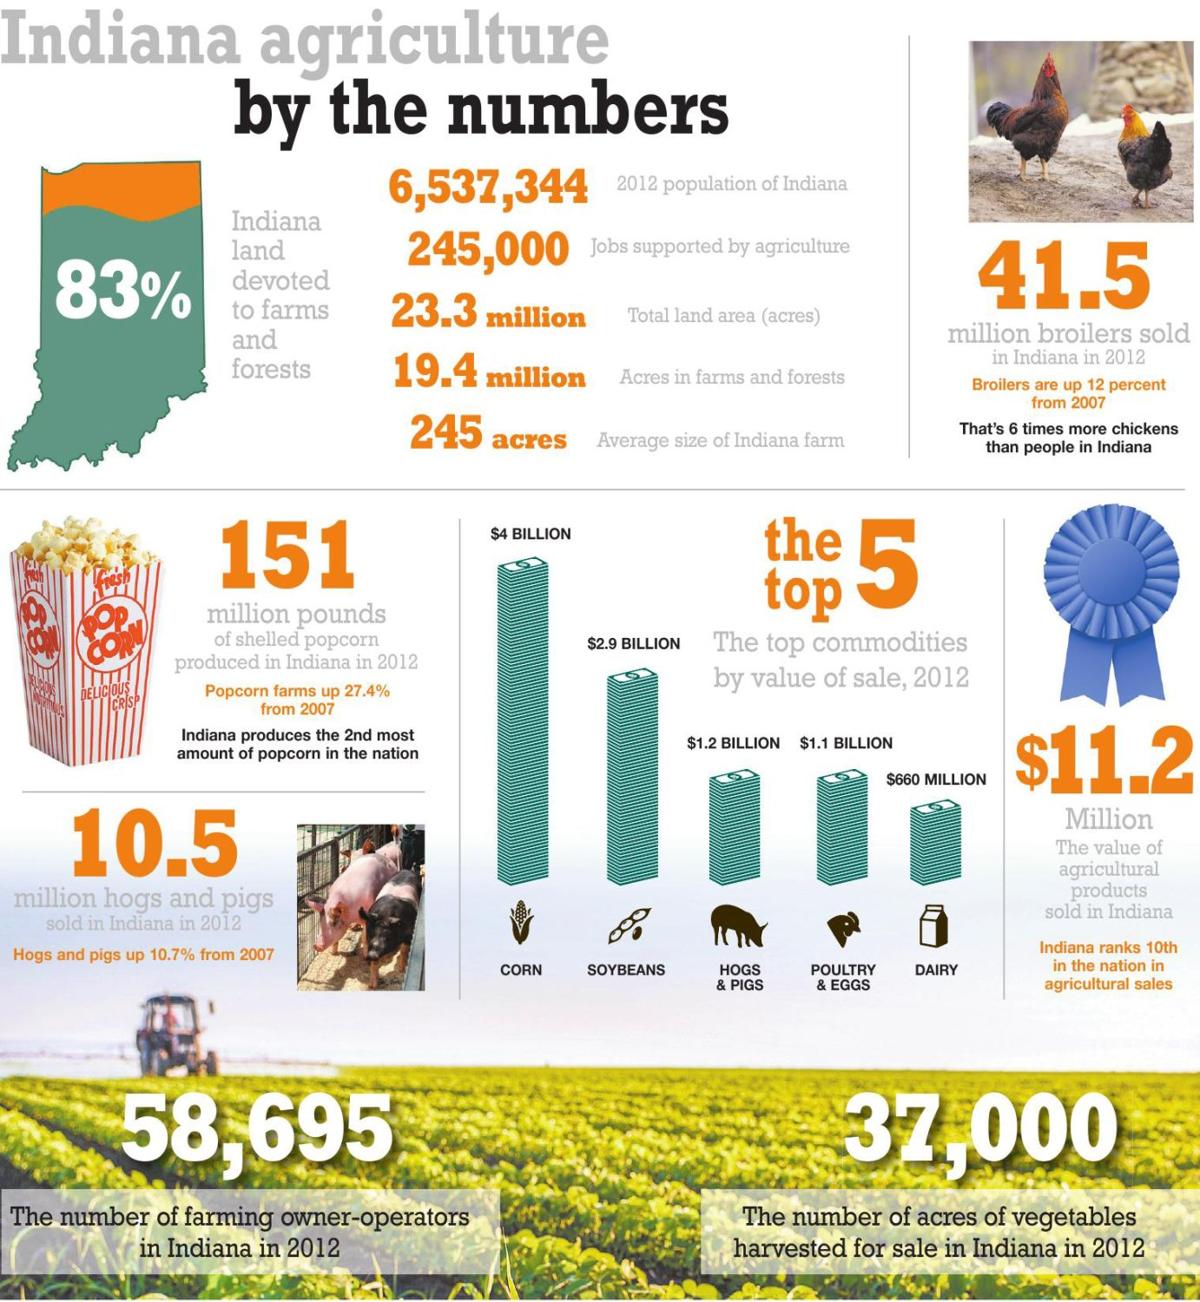 Indiana agriculture by the numbers